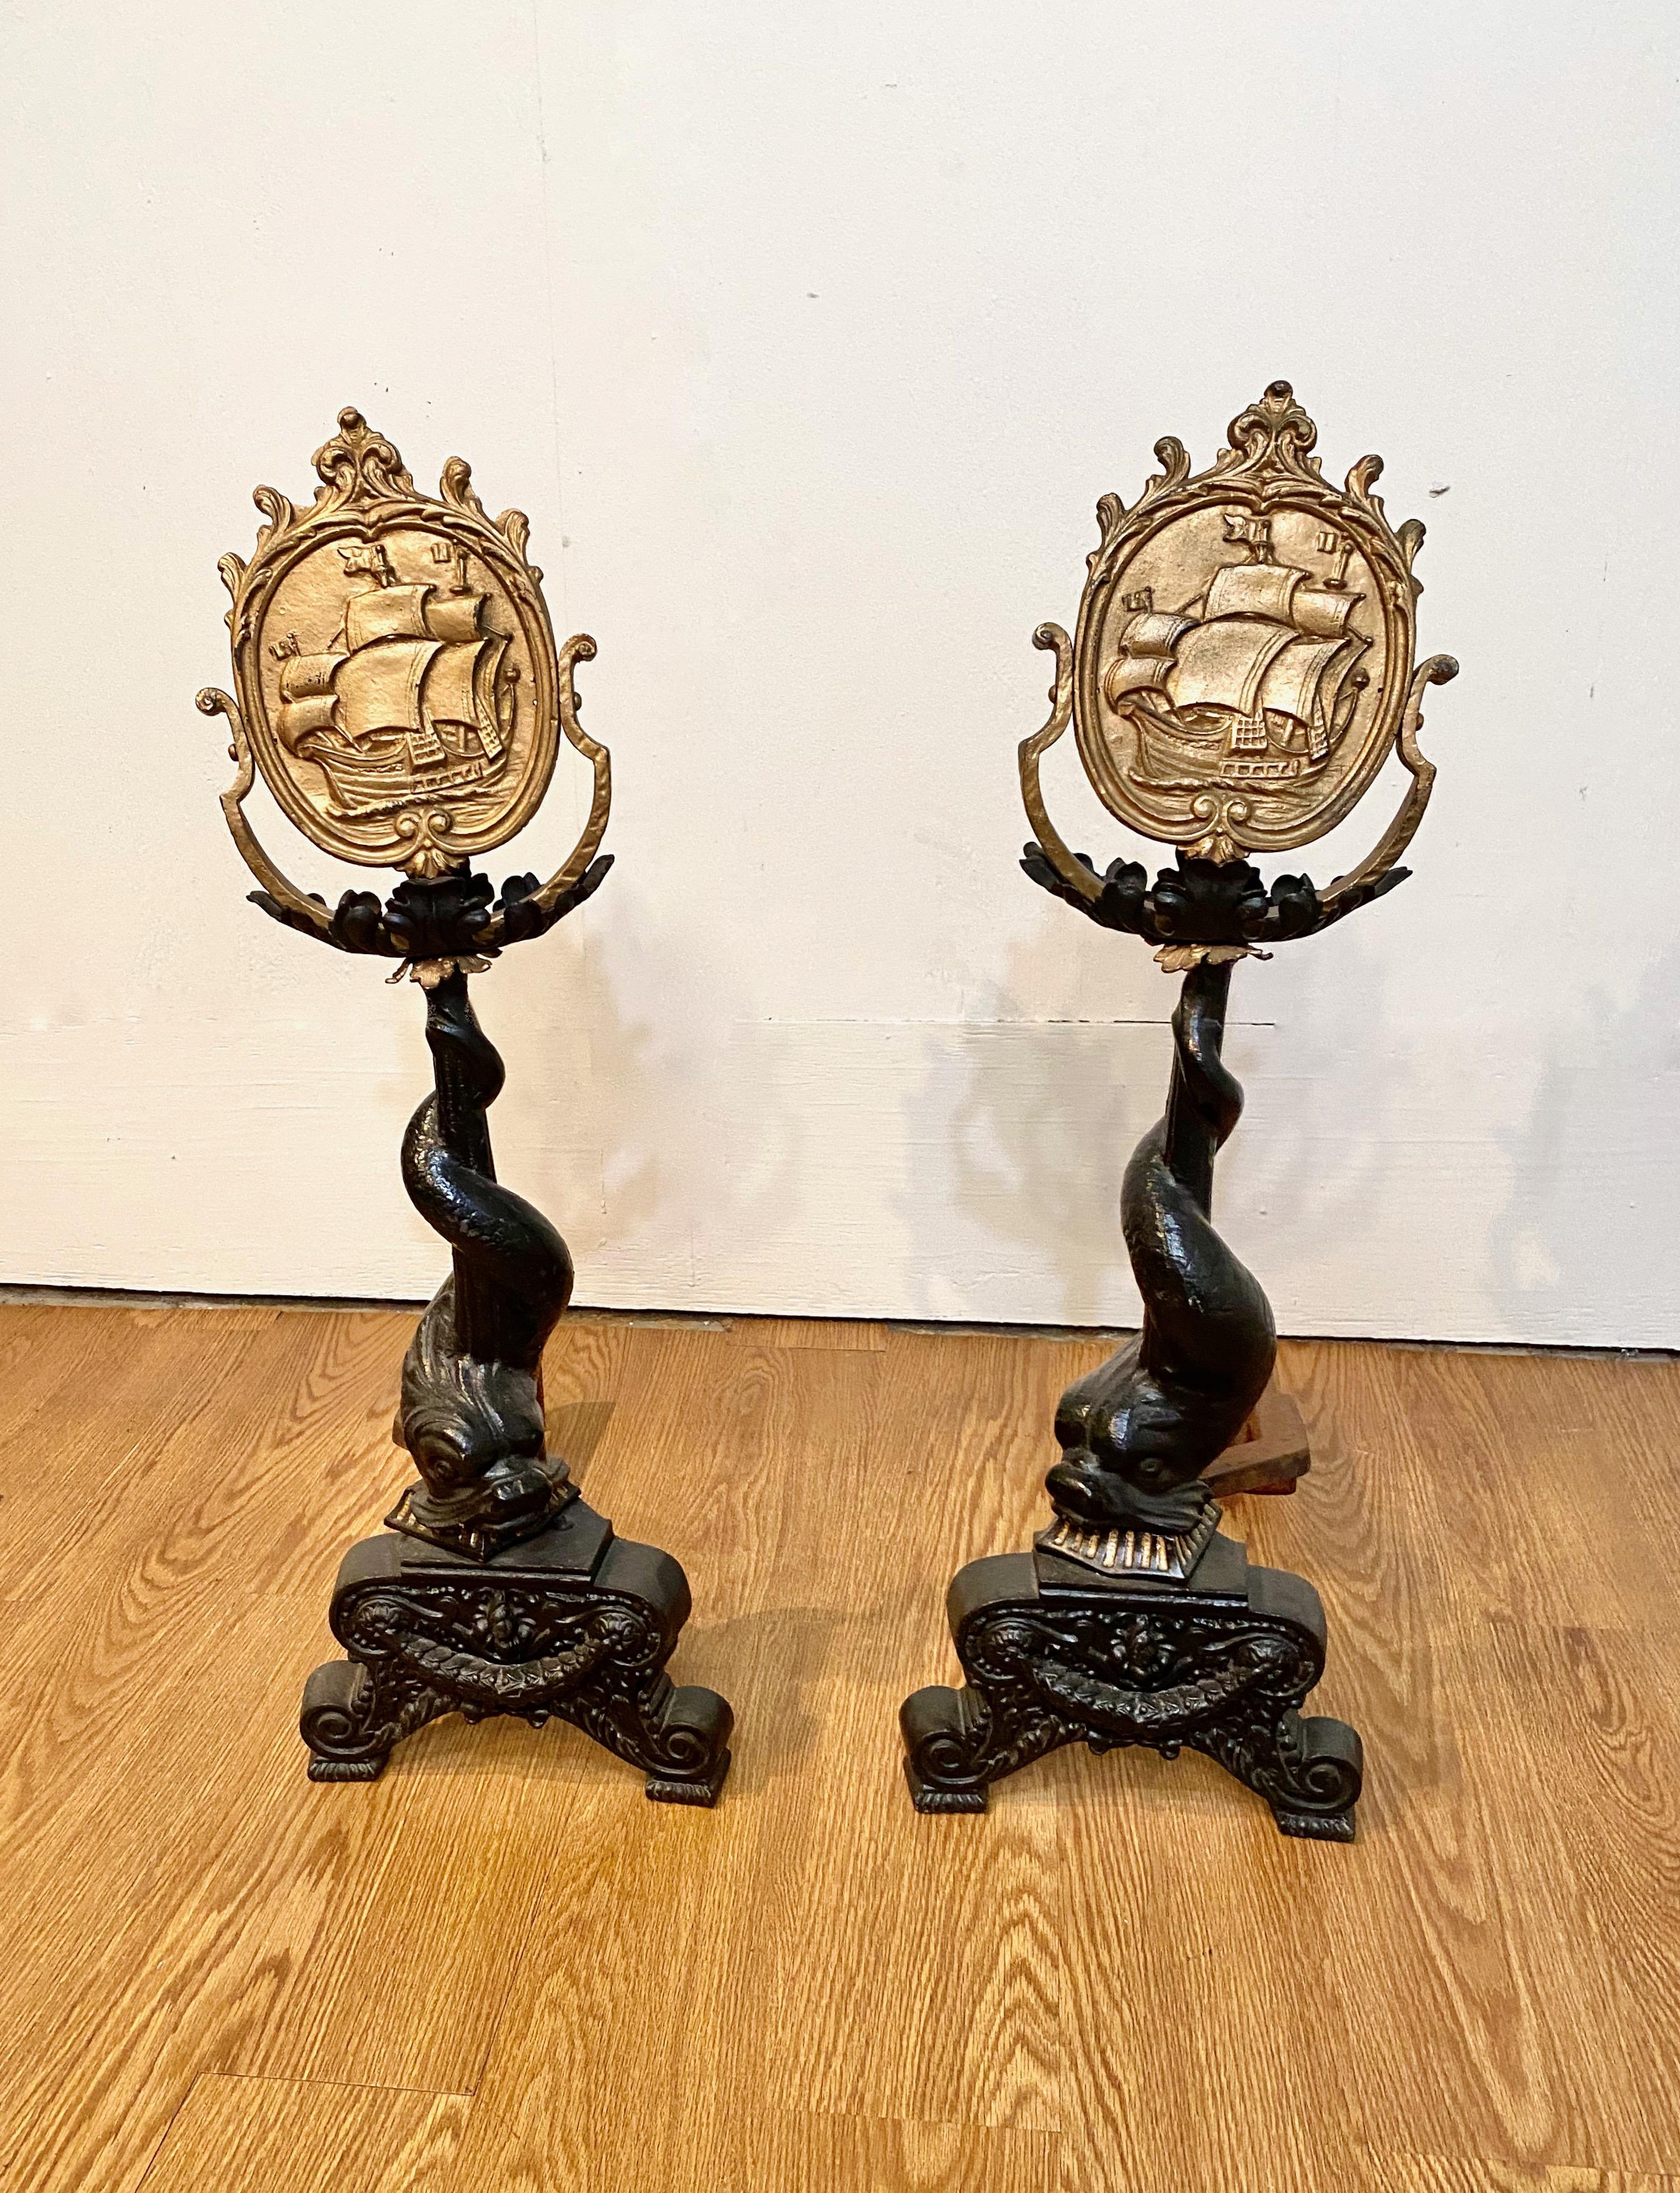 This is an exceptional pair of large c. 1850 cast iron andirons. The andiron shaft is composed of a mythological dolphin on a classical plinth surmounted by a medallion encircling a 18th century sailing ship. All elements of the andirons are in very